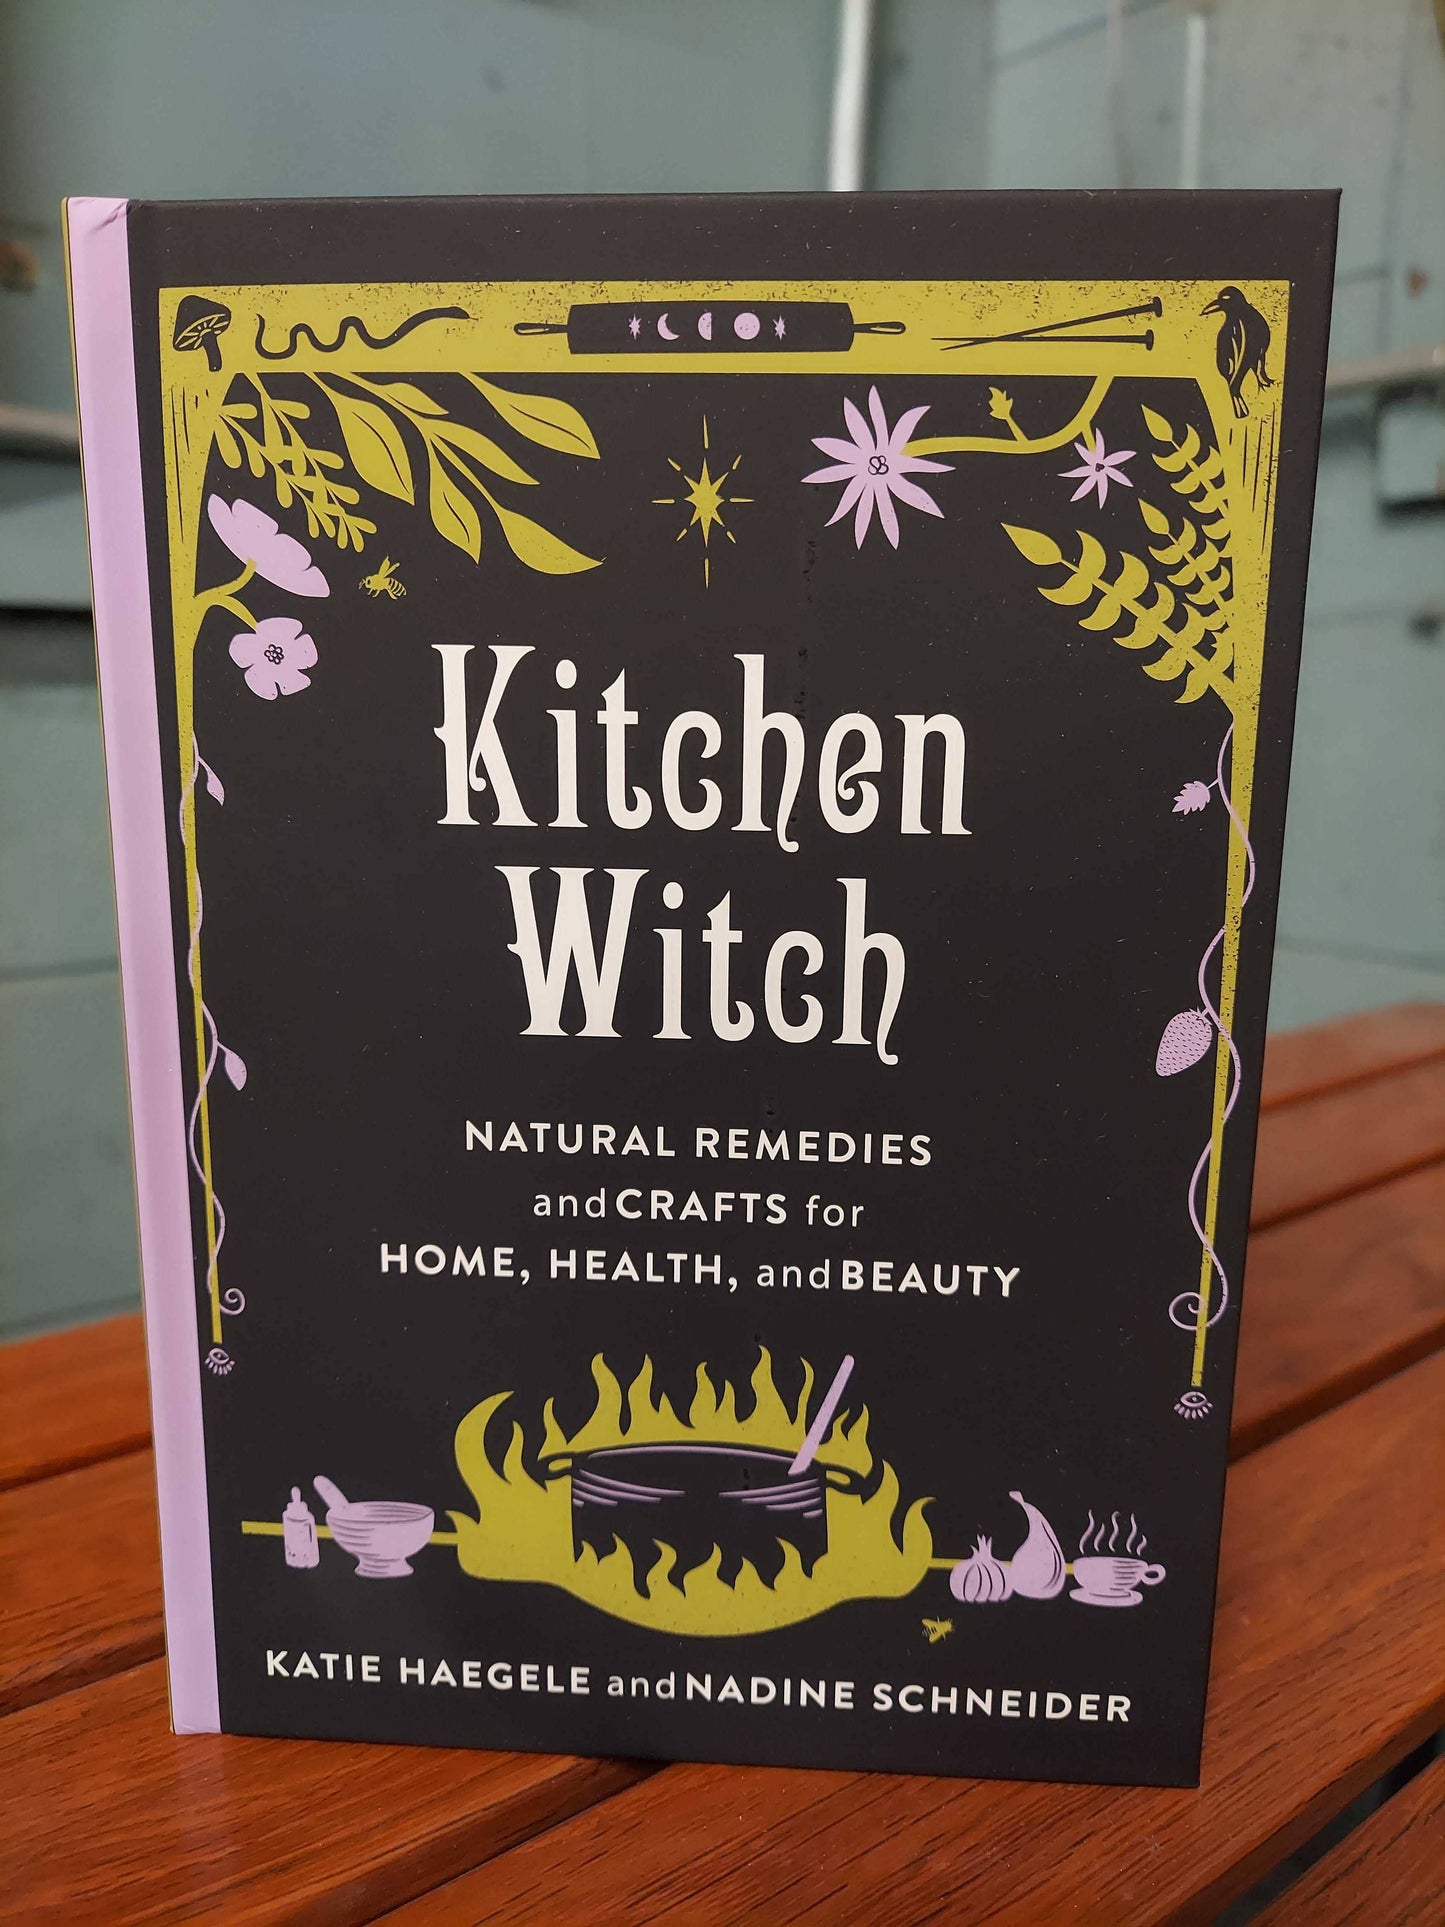 microcosm publishing - kitchen witch: natural remedies and crafts